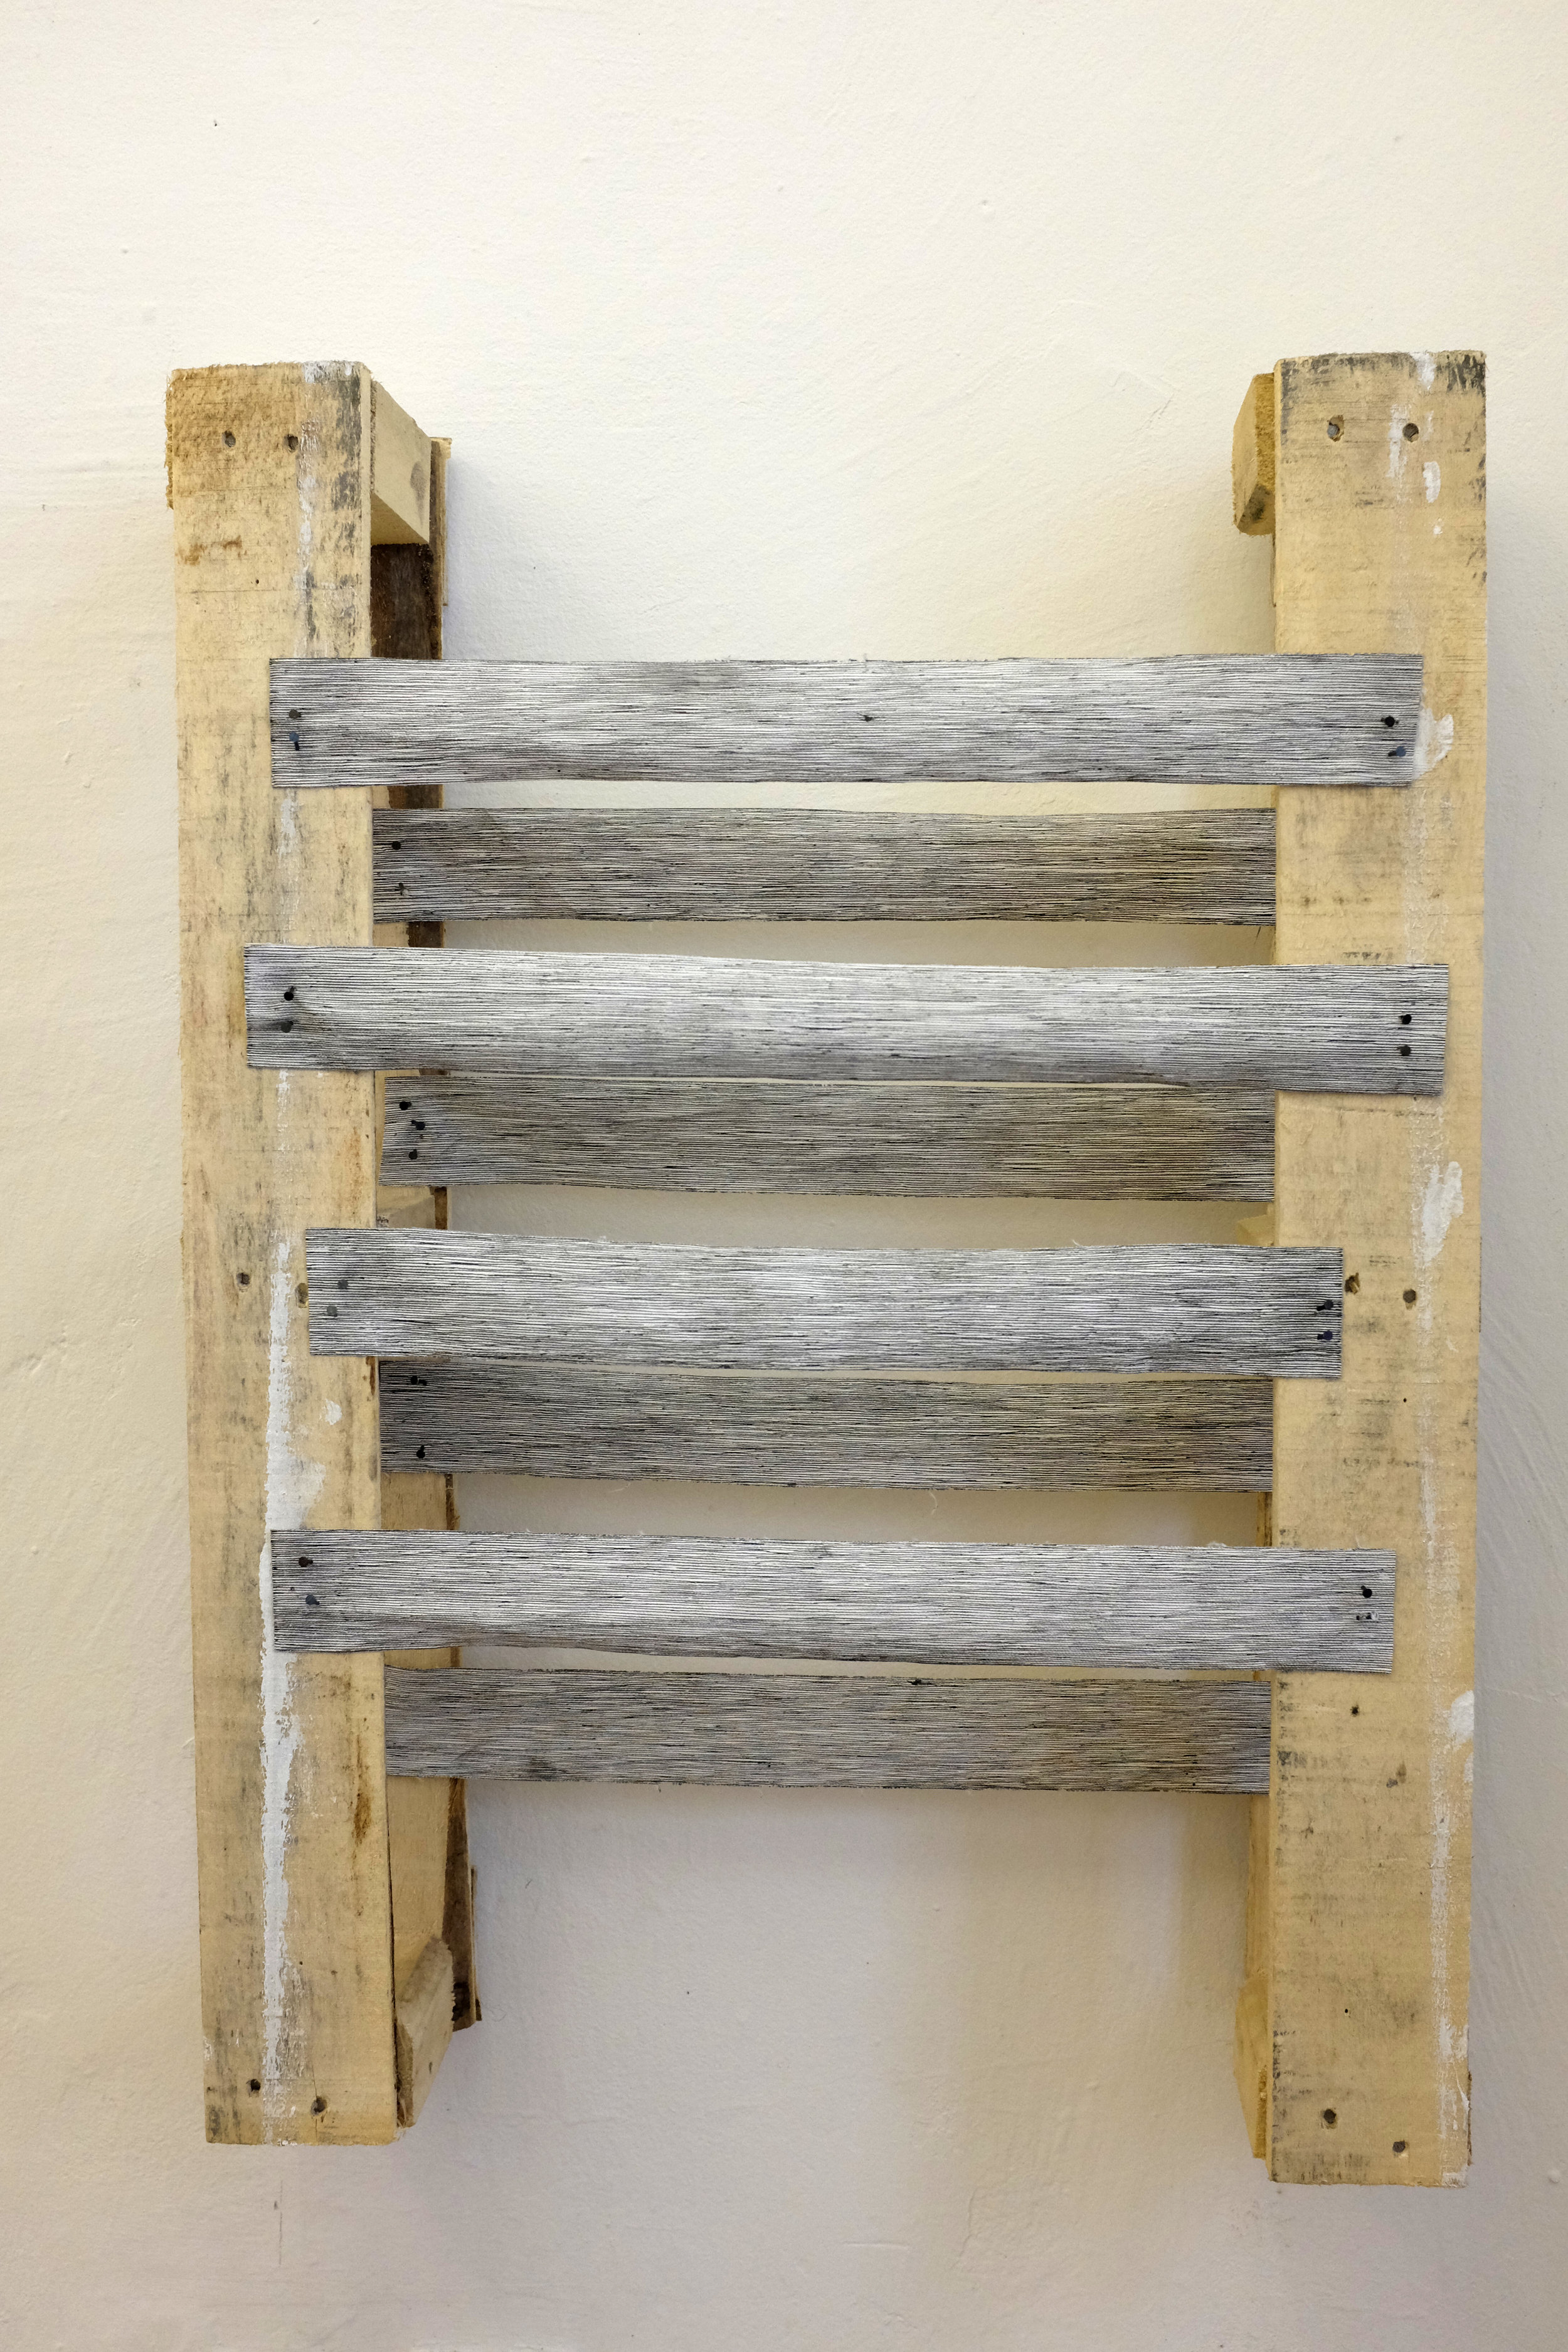   A decrepit ladder or a decrepit’s ladder,  2018. Ink on canvas, nails, screws and wood. Exhibited at Horánkszy 27 pop-up gallery in Budapest. 